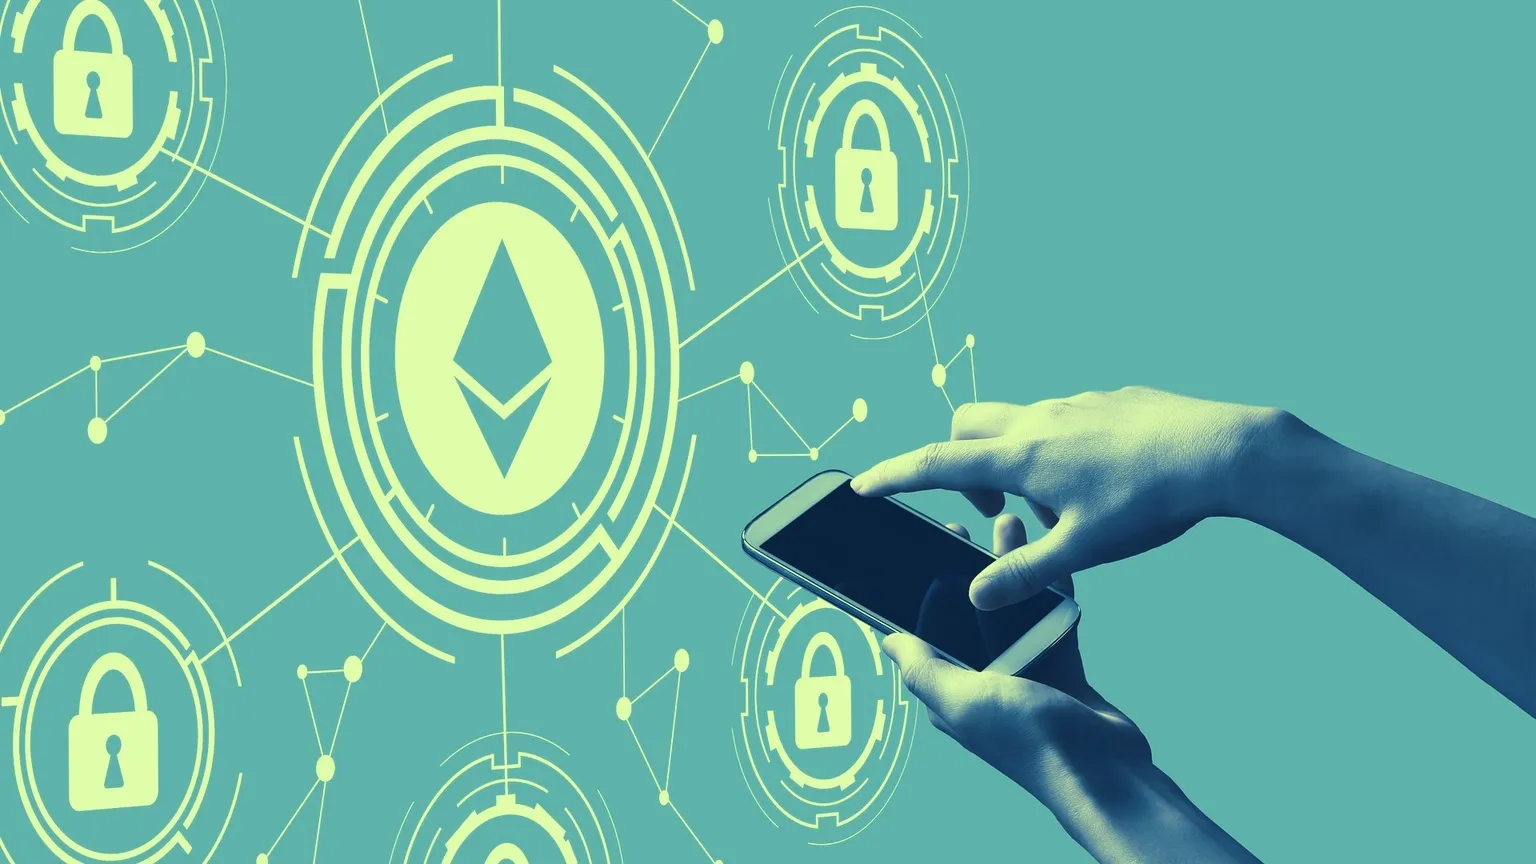 Developers enable "stealth" transactions on the Ethereum network. Image: Shutterstock